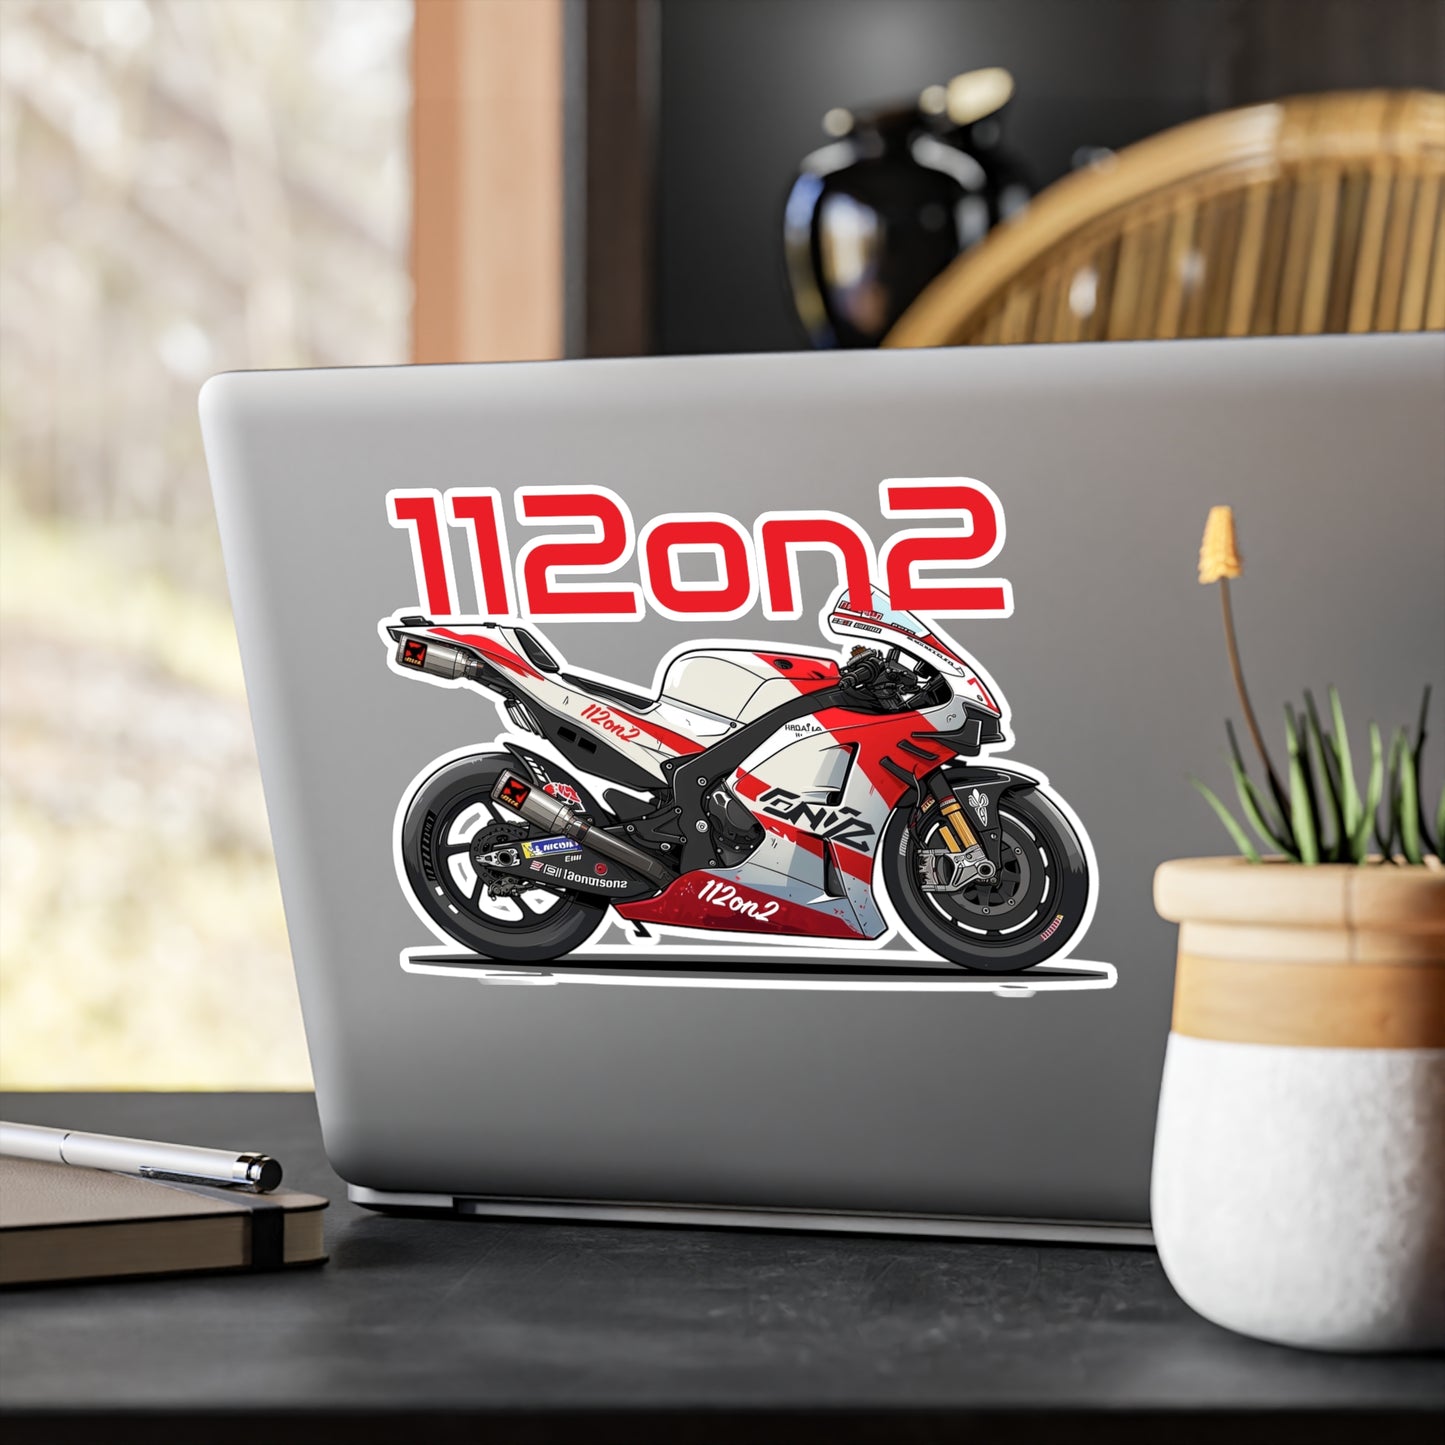 112on2 Cartoon Racing Motorcycle V1 Stickers - 112ON2 SHOP